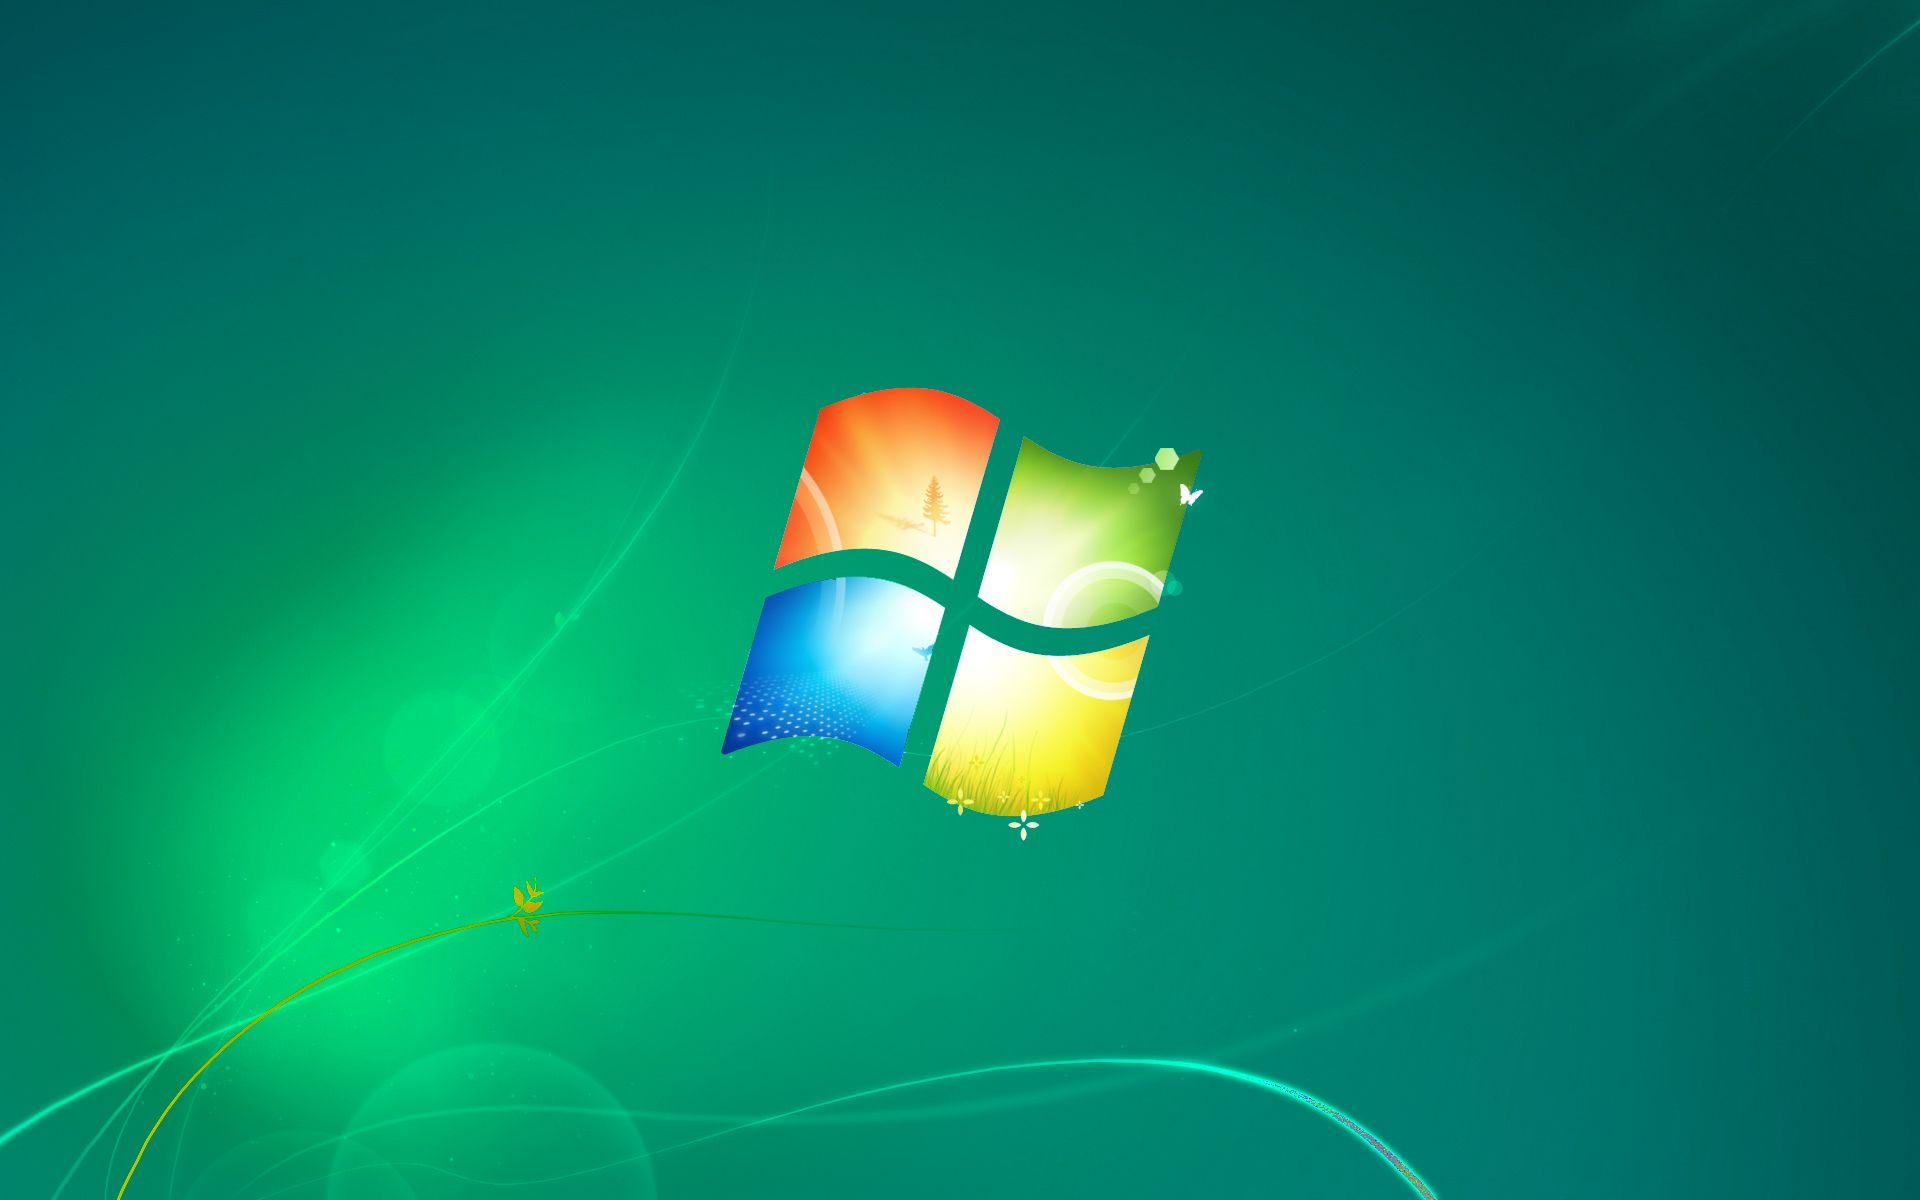 Windows 7 Default Wallpaper Green Version by dominichulme on ...